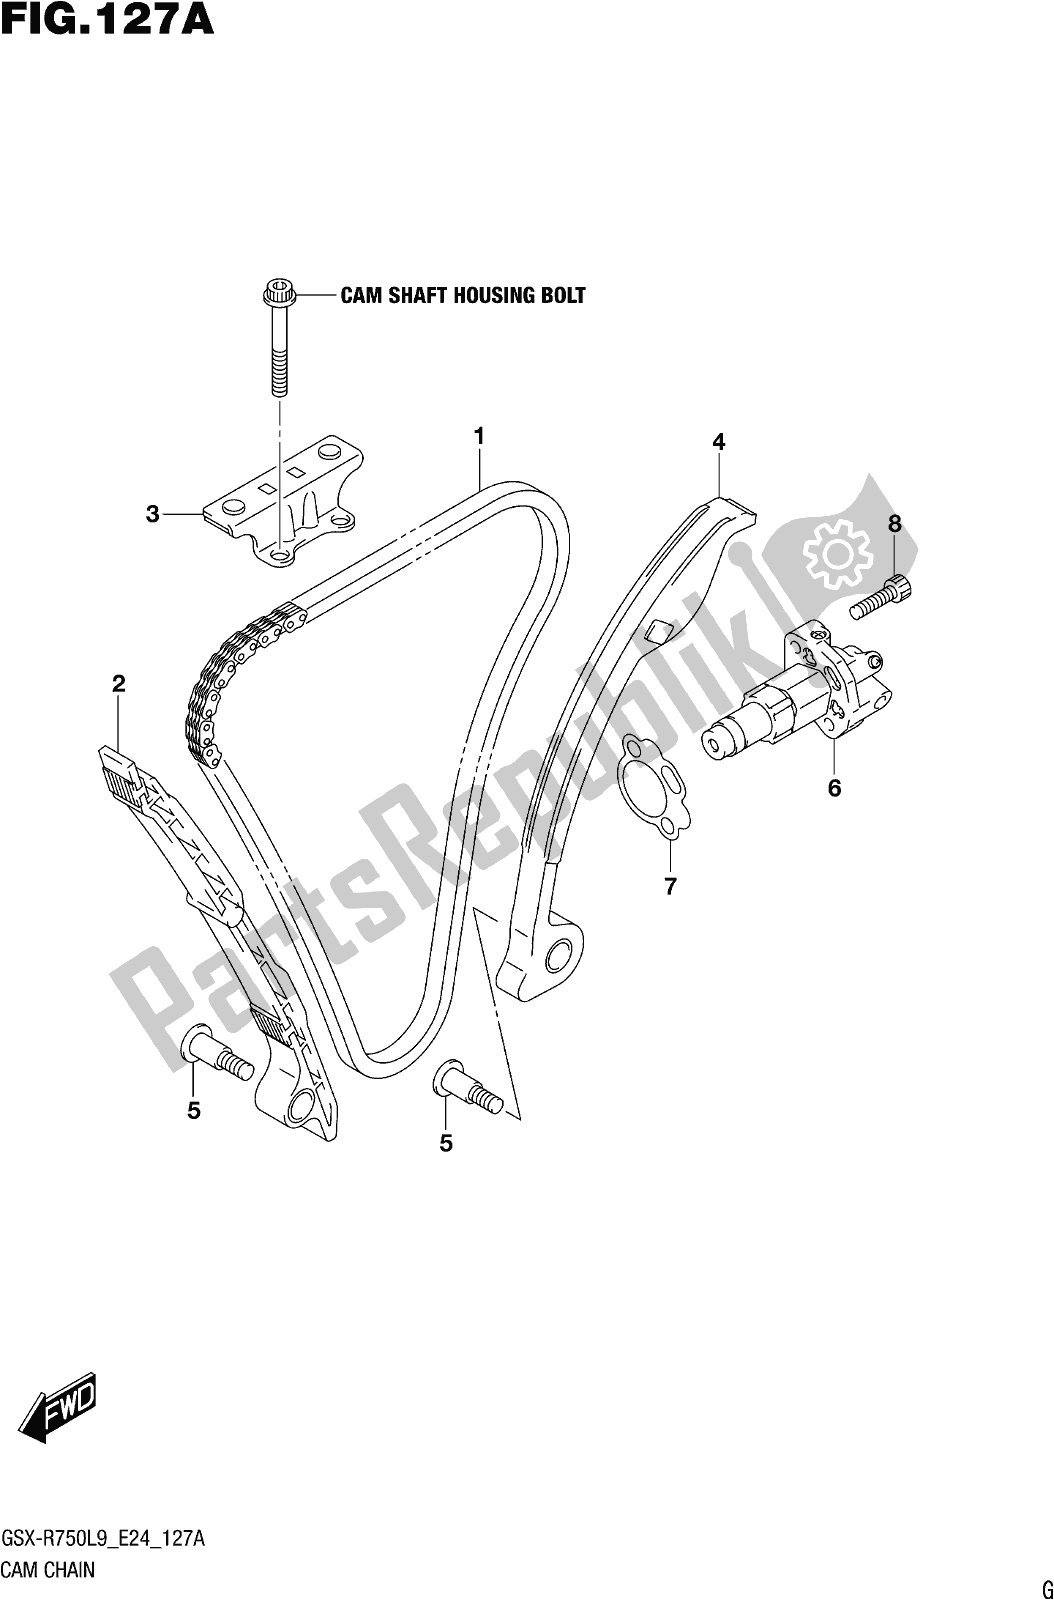 All parts for the Fig. 127a Cam Chain of the Suzuki Gsx-r 750 2019